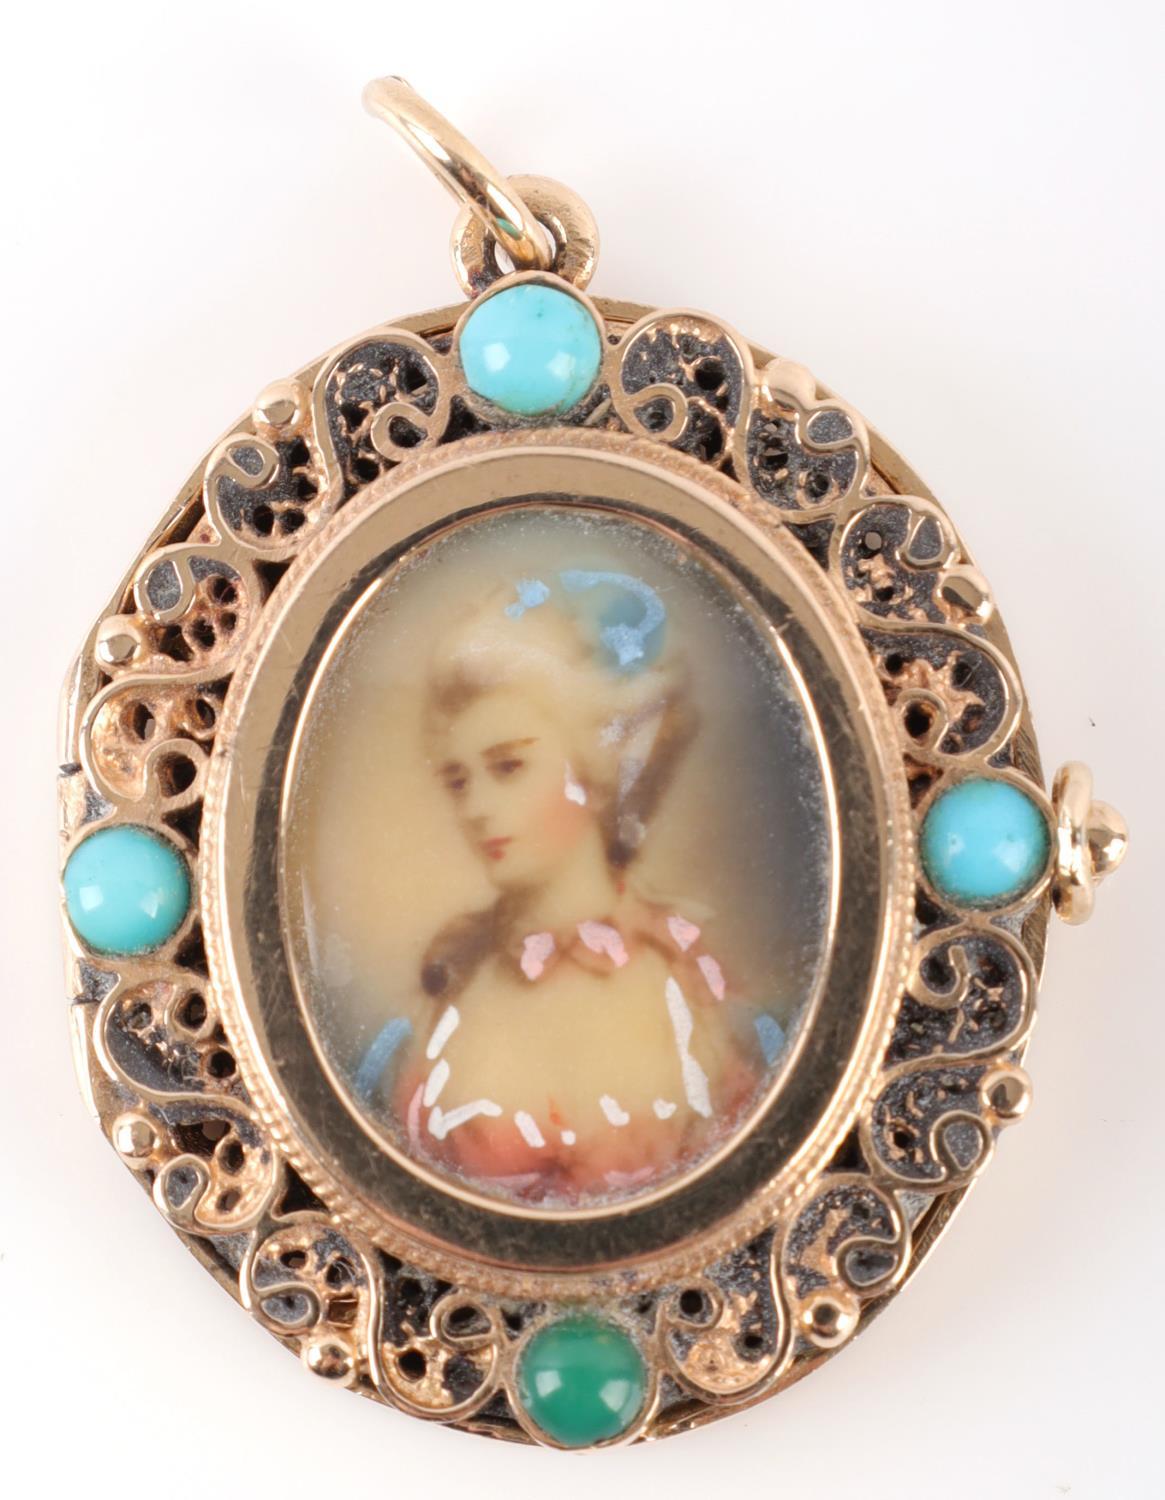 18TH CENTURY 14KT & HAND PAINTED LOCKET TURQUOISE